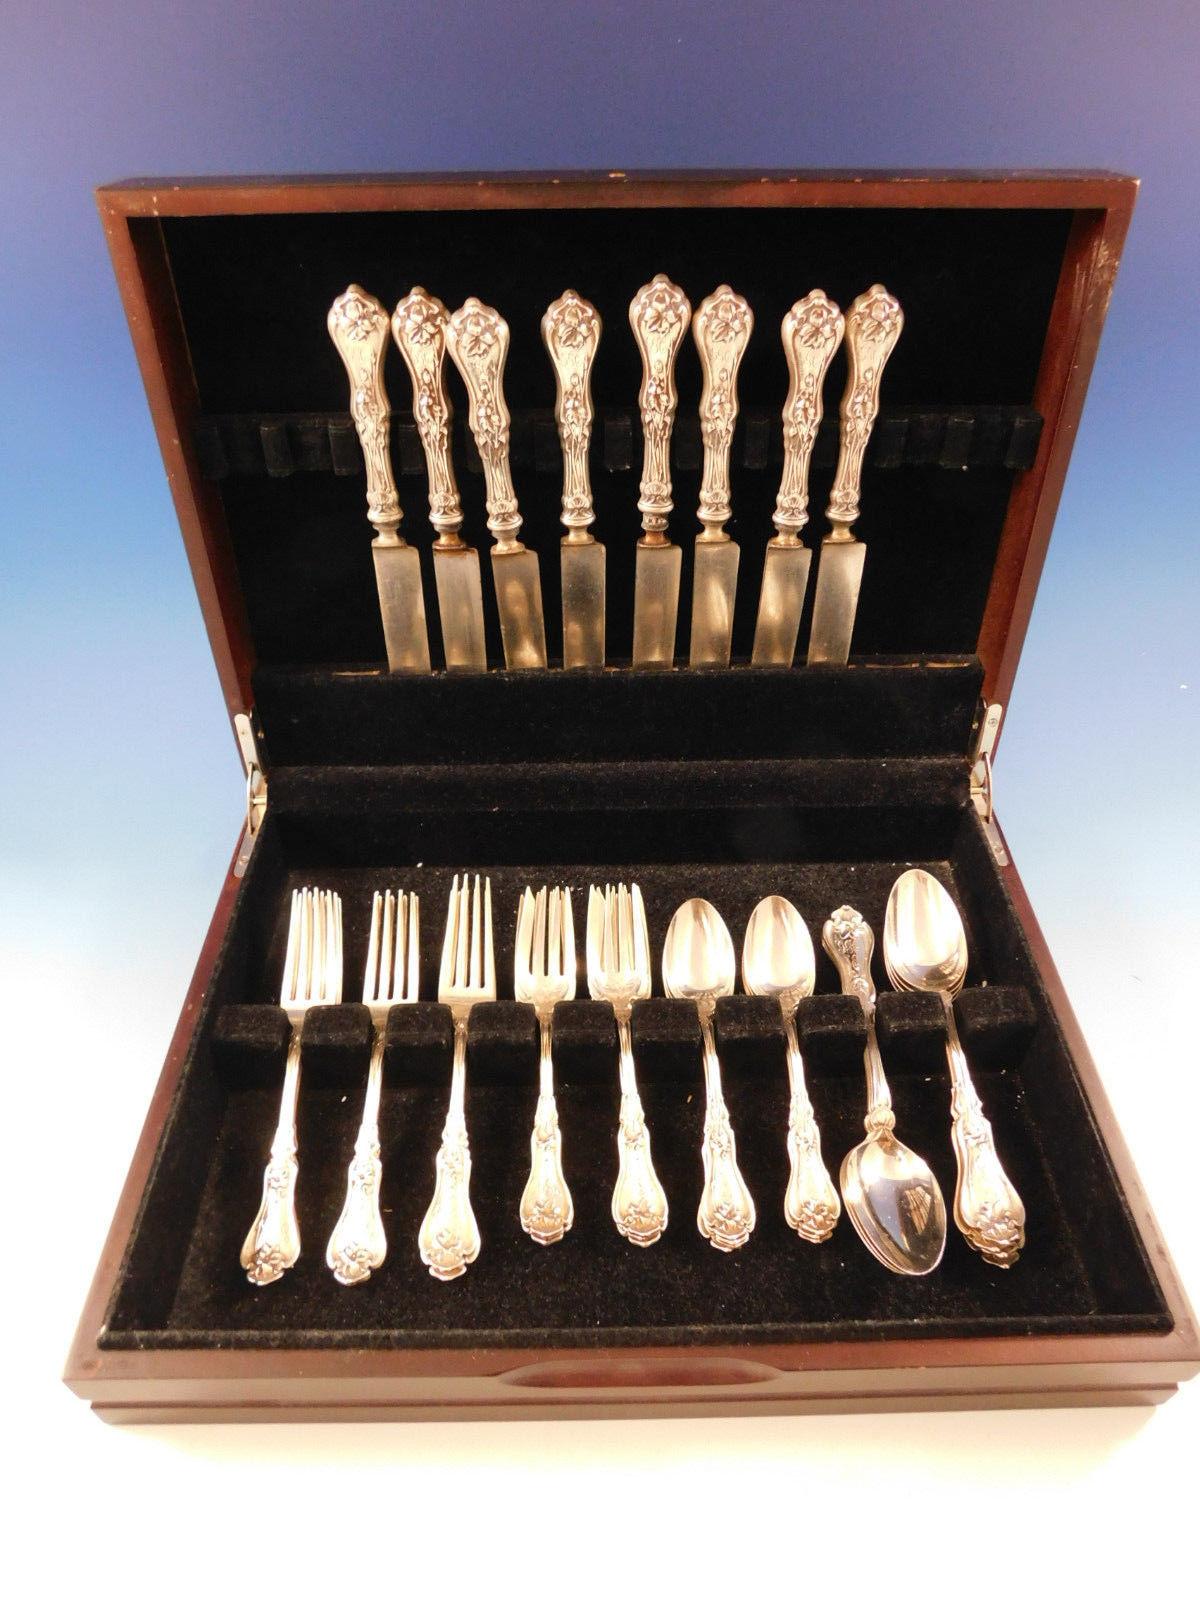 Violet by Whiting Sterling Silver Flatware set - 40 pieces. This set includes:

8 Knives, with original silverplated blunt blades, 9